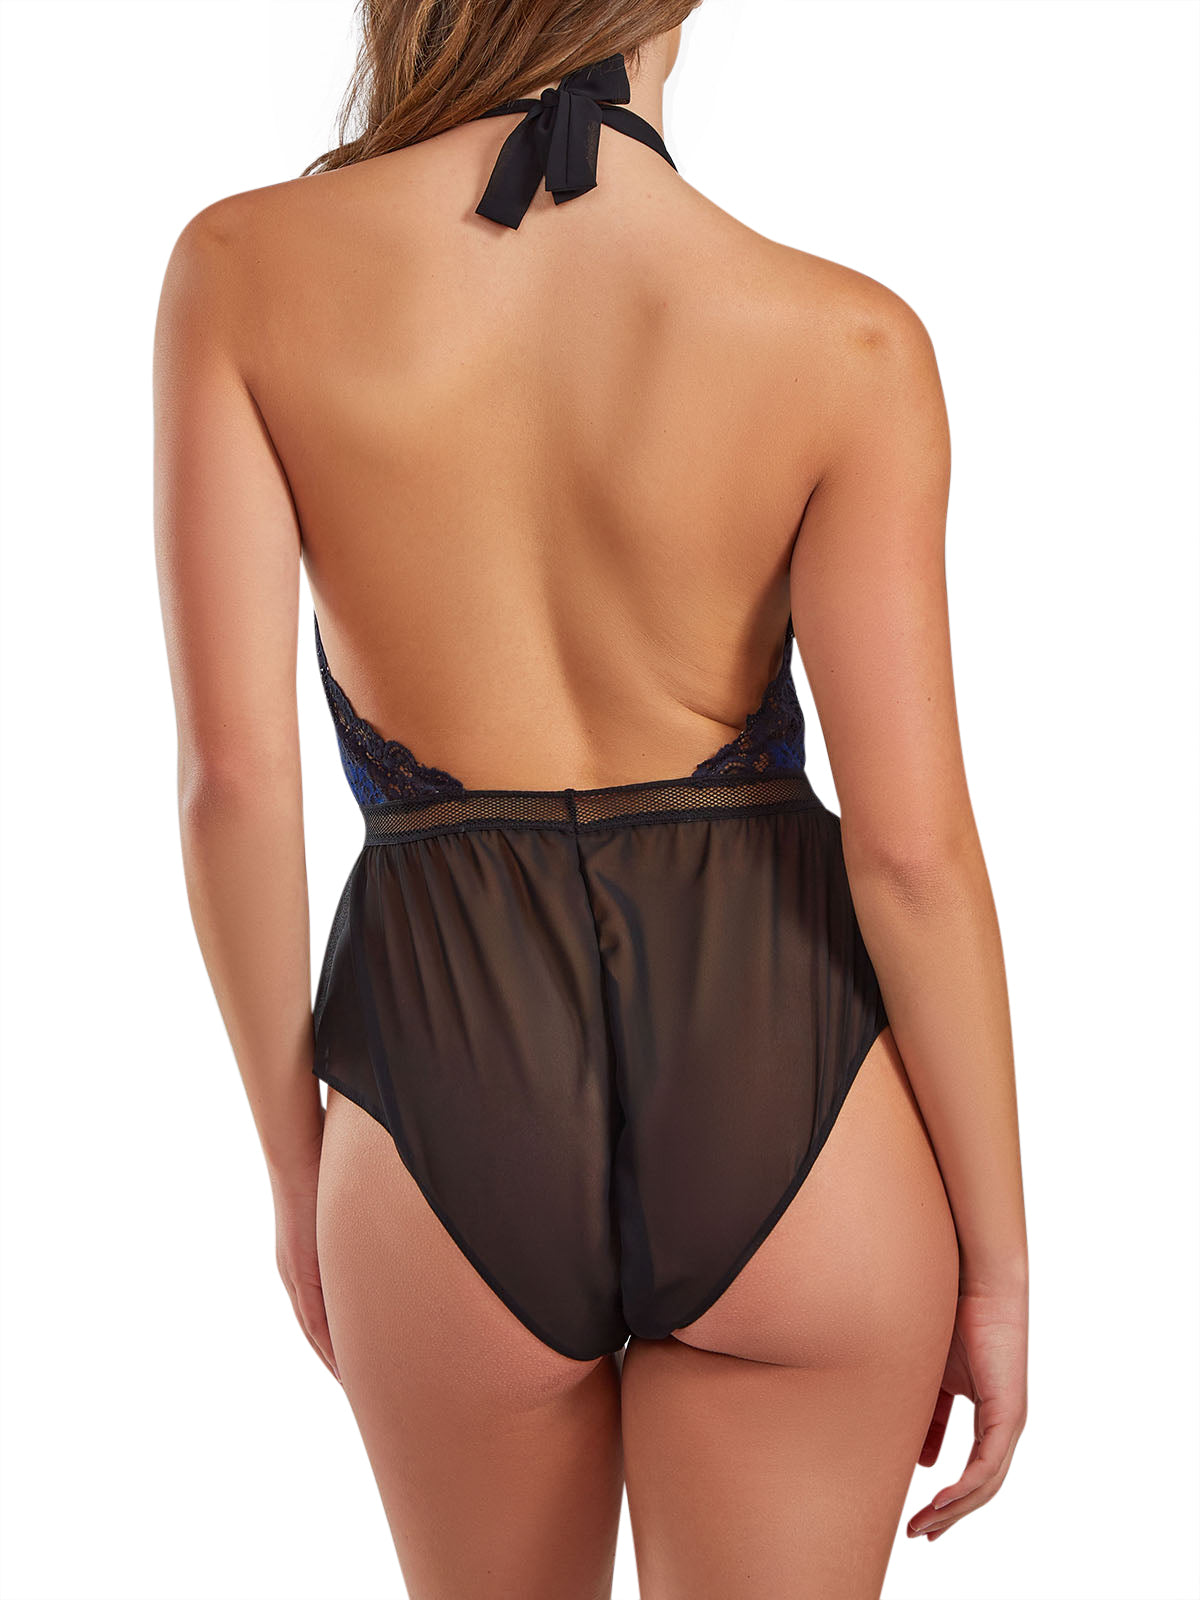 iCollection Teddy Women's Marley Teddy Lingerie